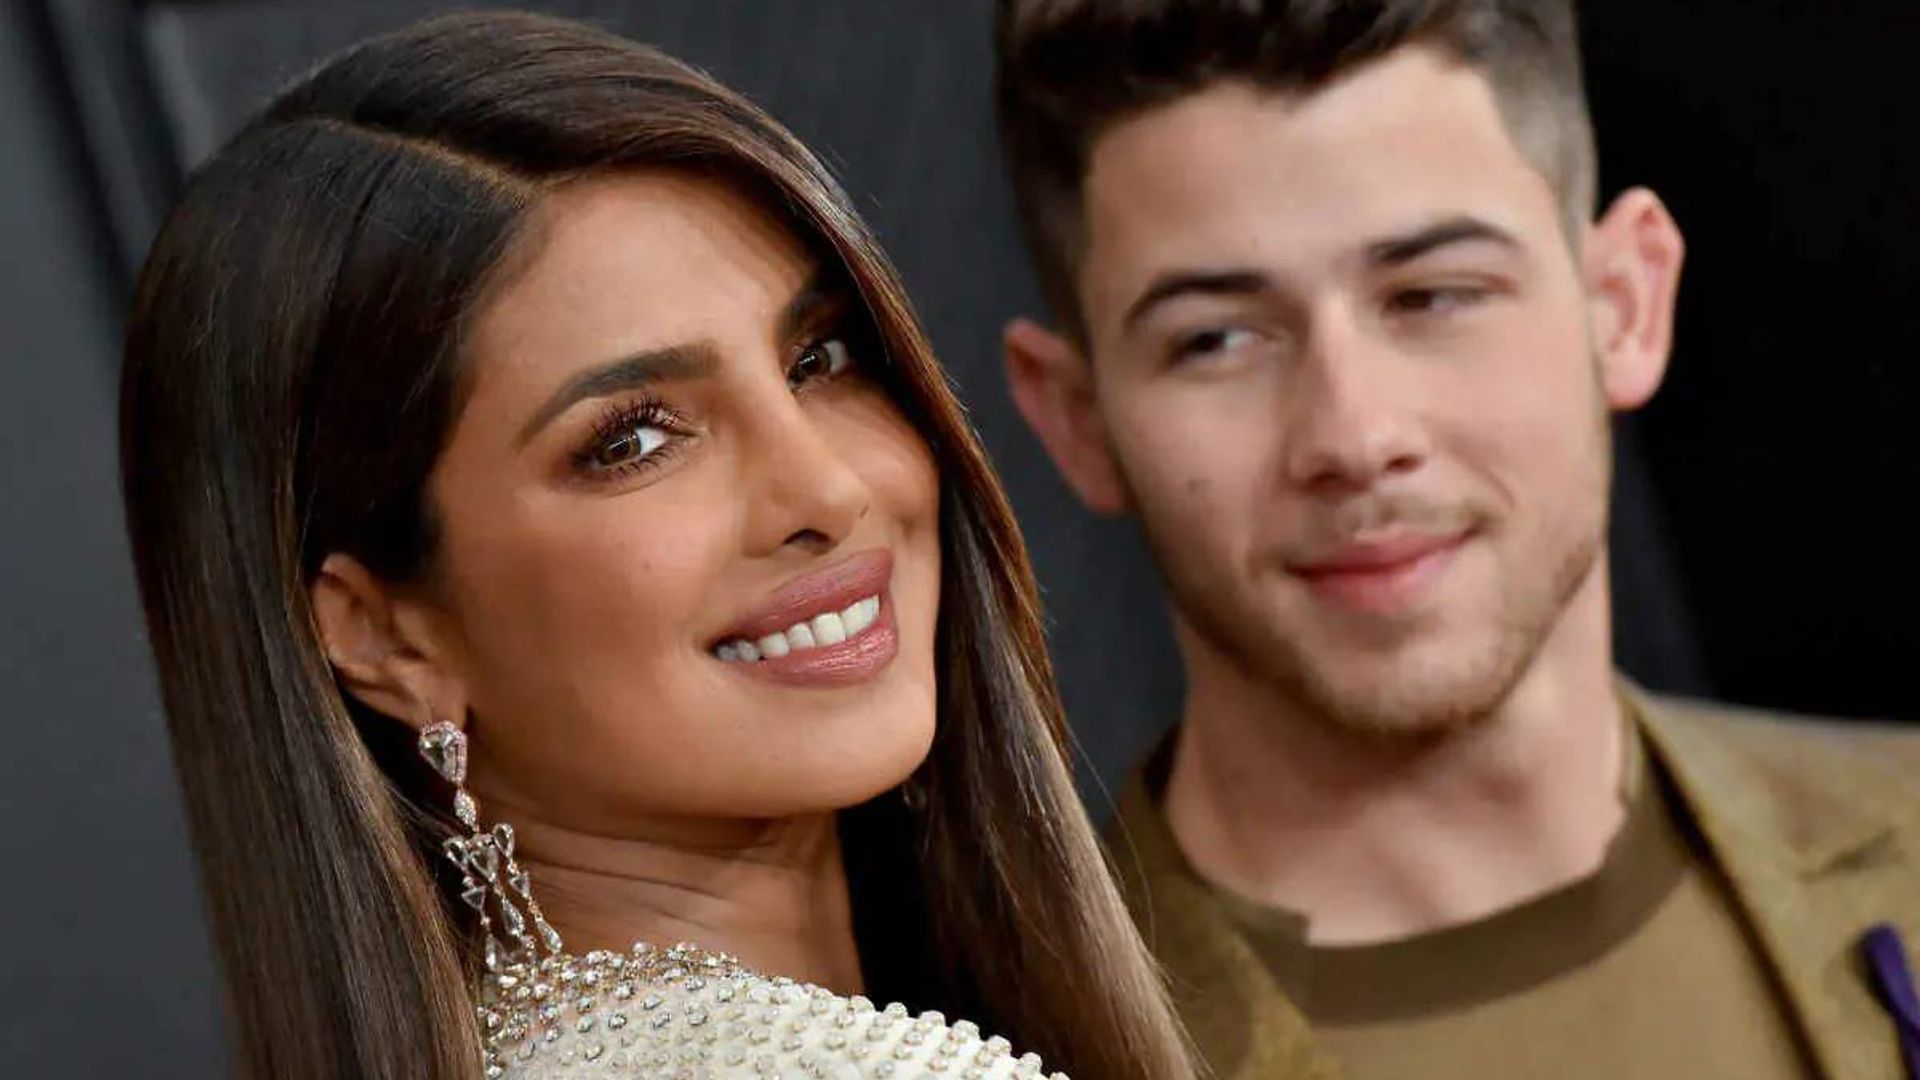 Priyanka Chopra introduces unexpected new additions in video from stunning family home